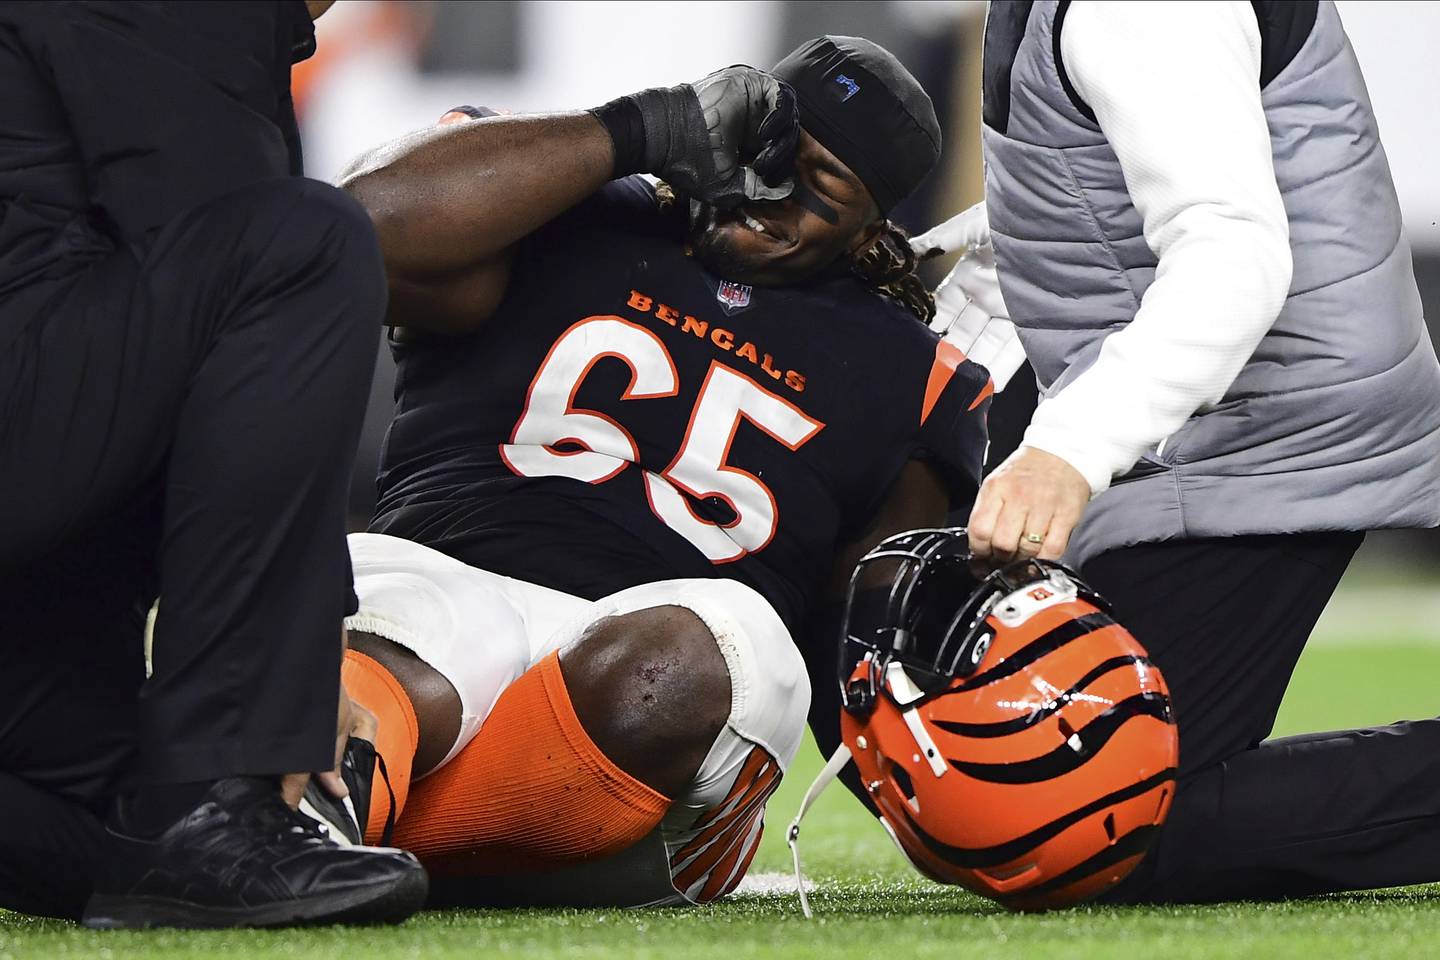 Bengals defensive tackle Larry Ogunjobi reacts after an injury during a wild-card playoff game against the Raiders on Jan. 15, 2022.